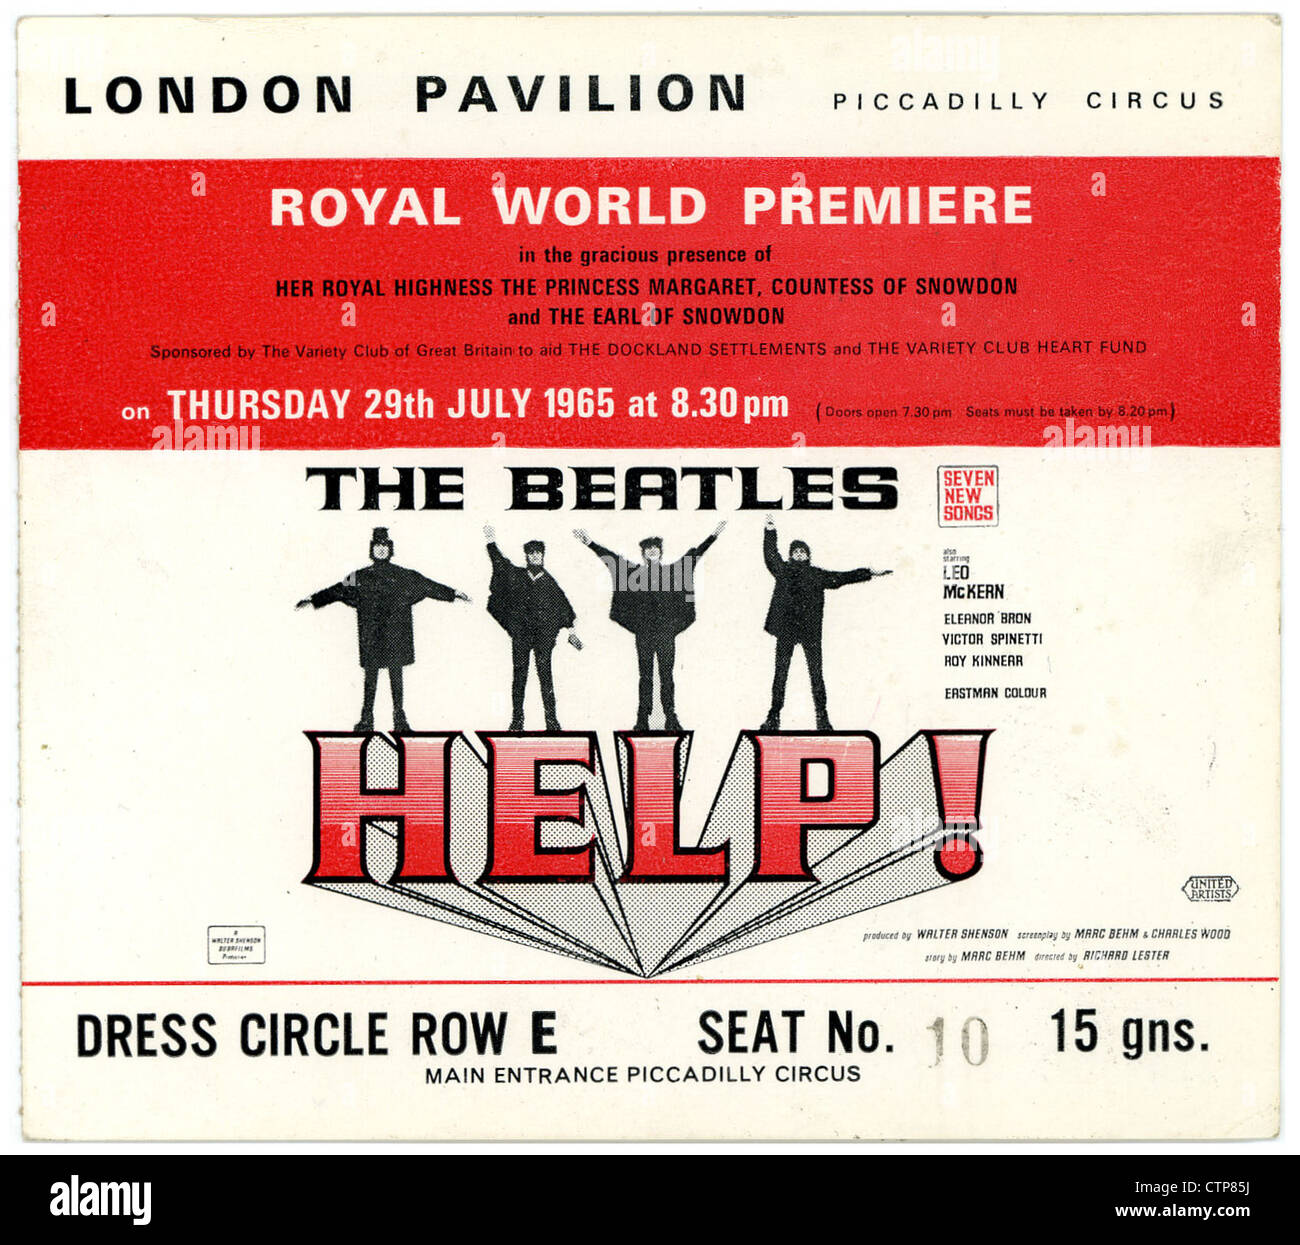 001362 - The Beatles Help! Royal World Premiere Ticket from the London Pavilion on 29th July 1965 Stock Photo